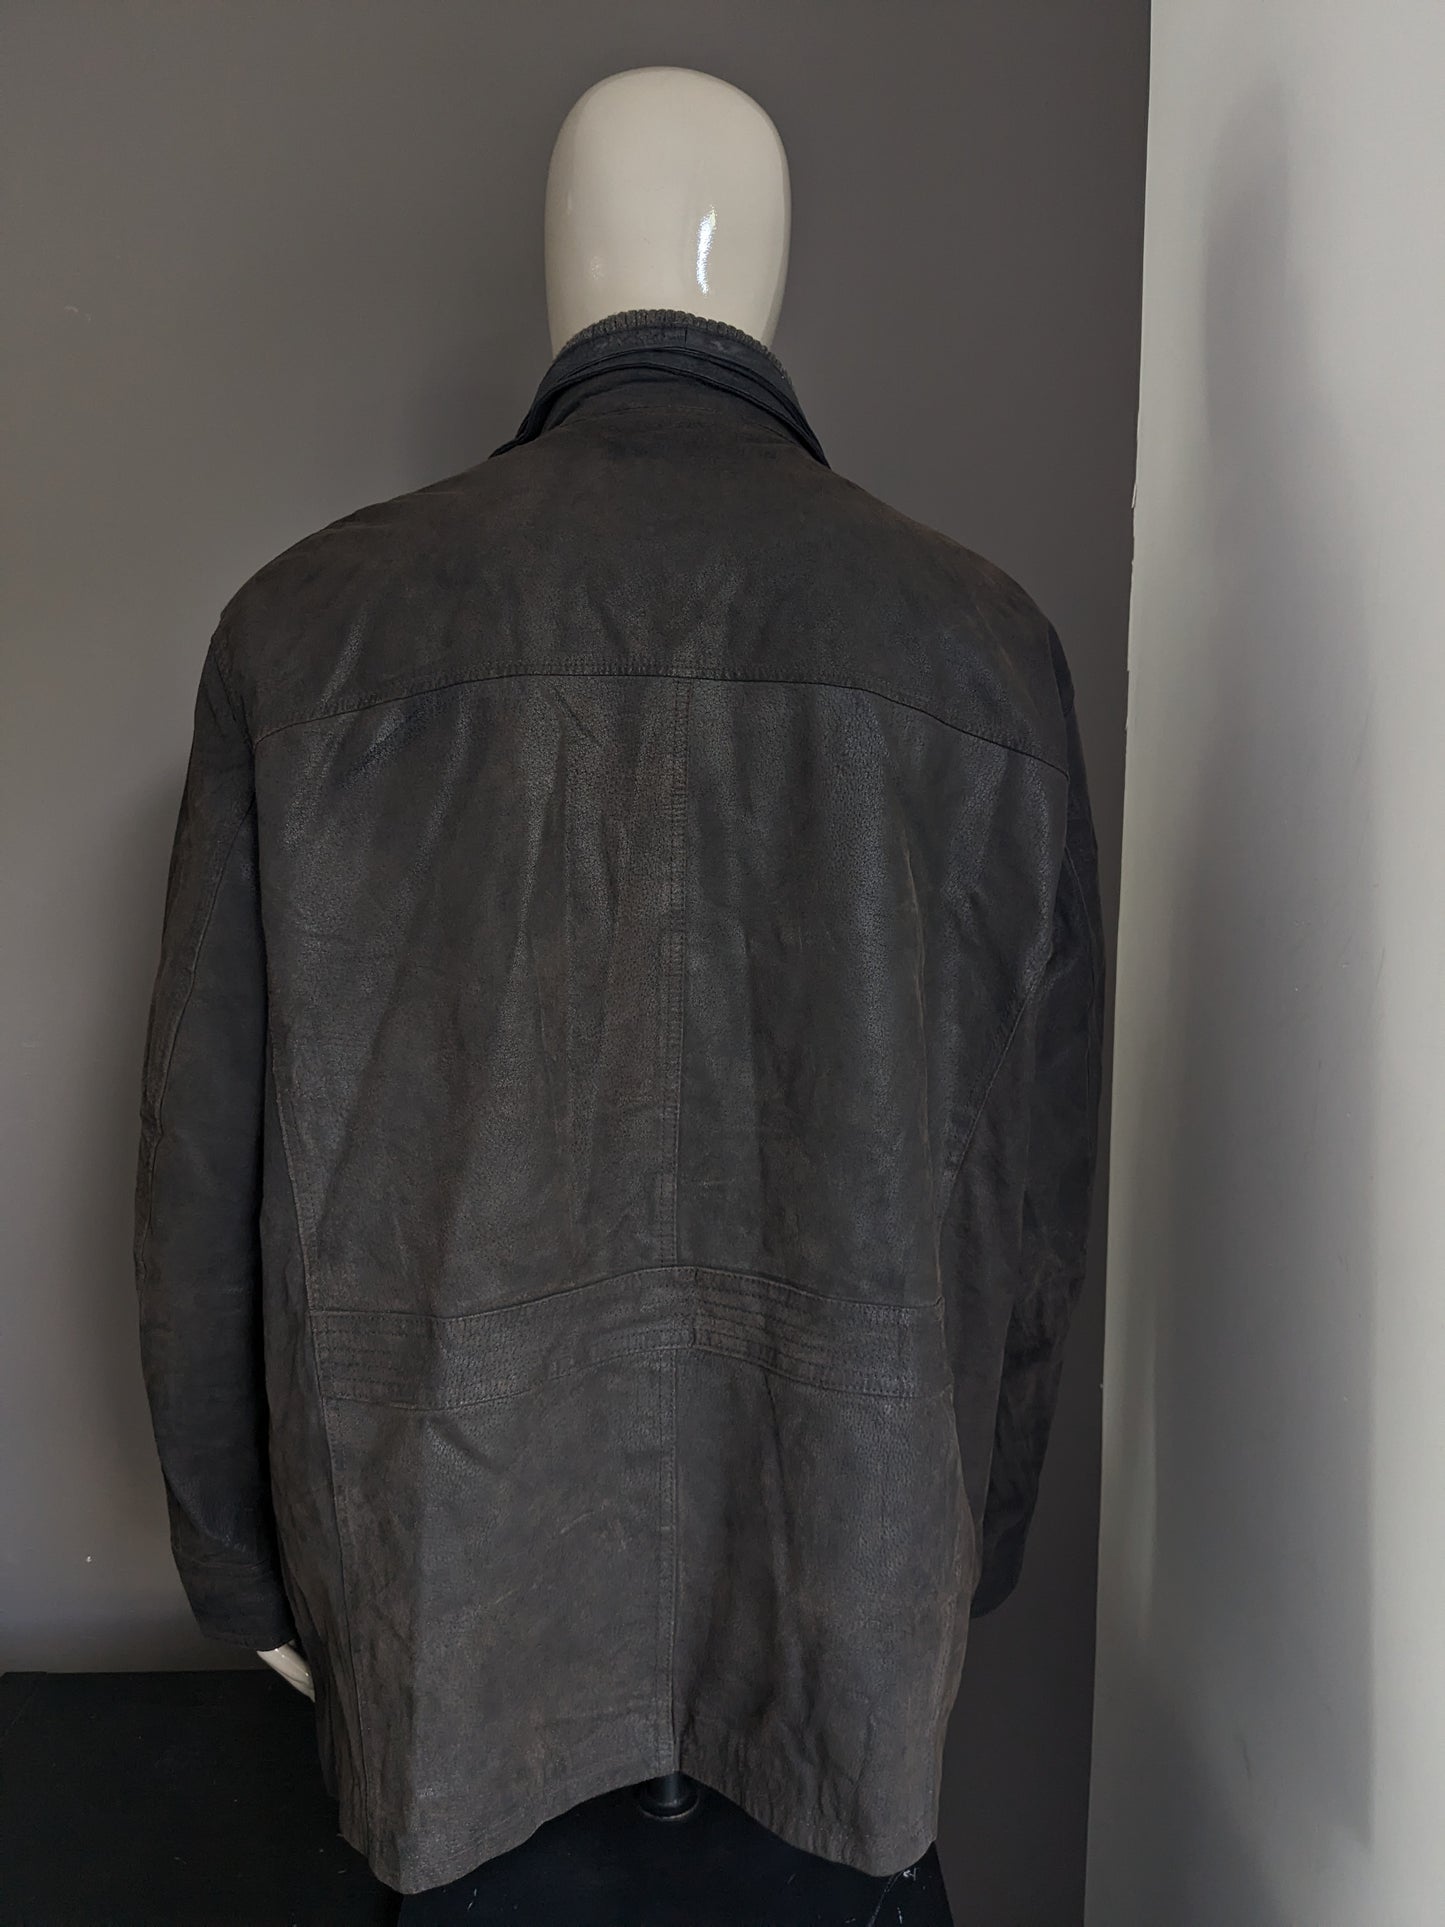 Leather style semi -long leather jacket. Dark brown colored. With detachable double closure and collar. Size 62-64/ 3XL.